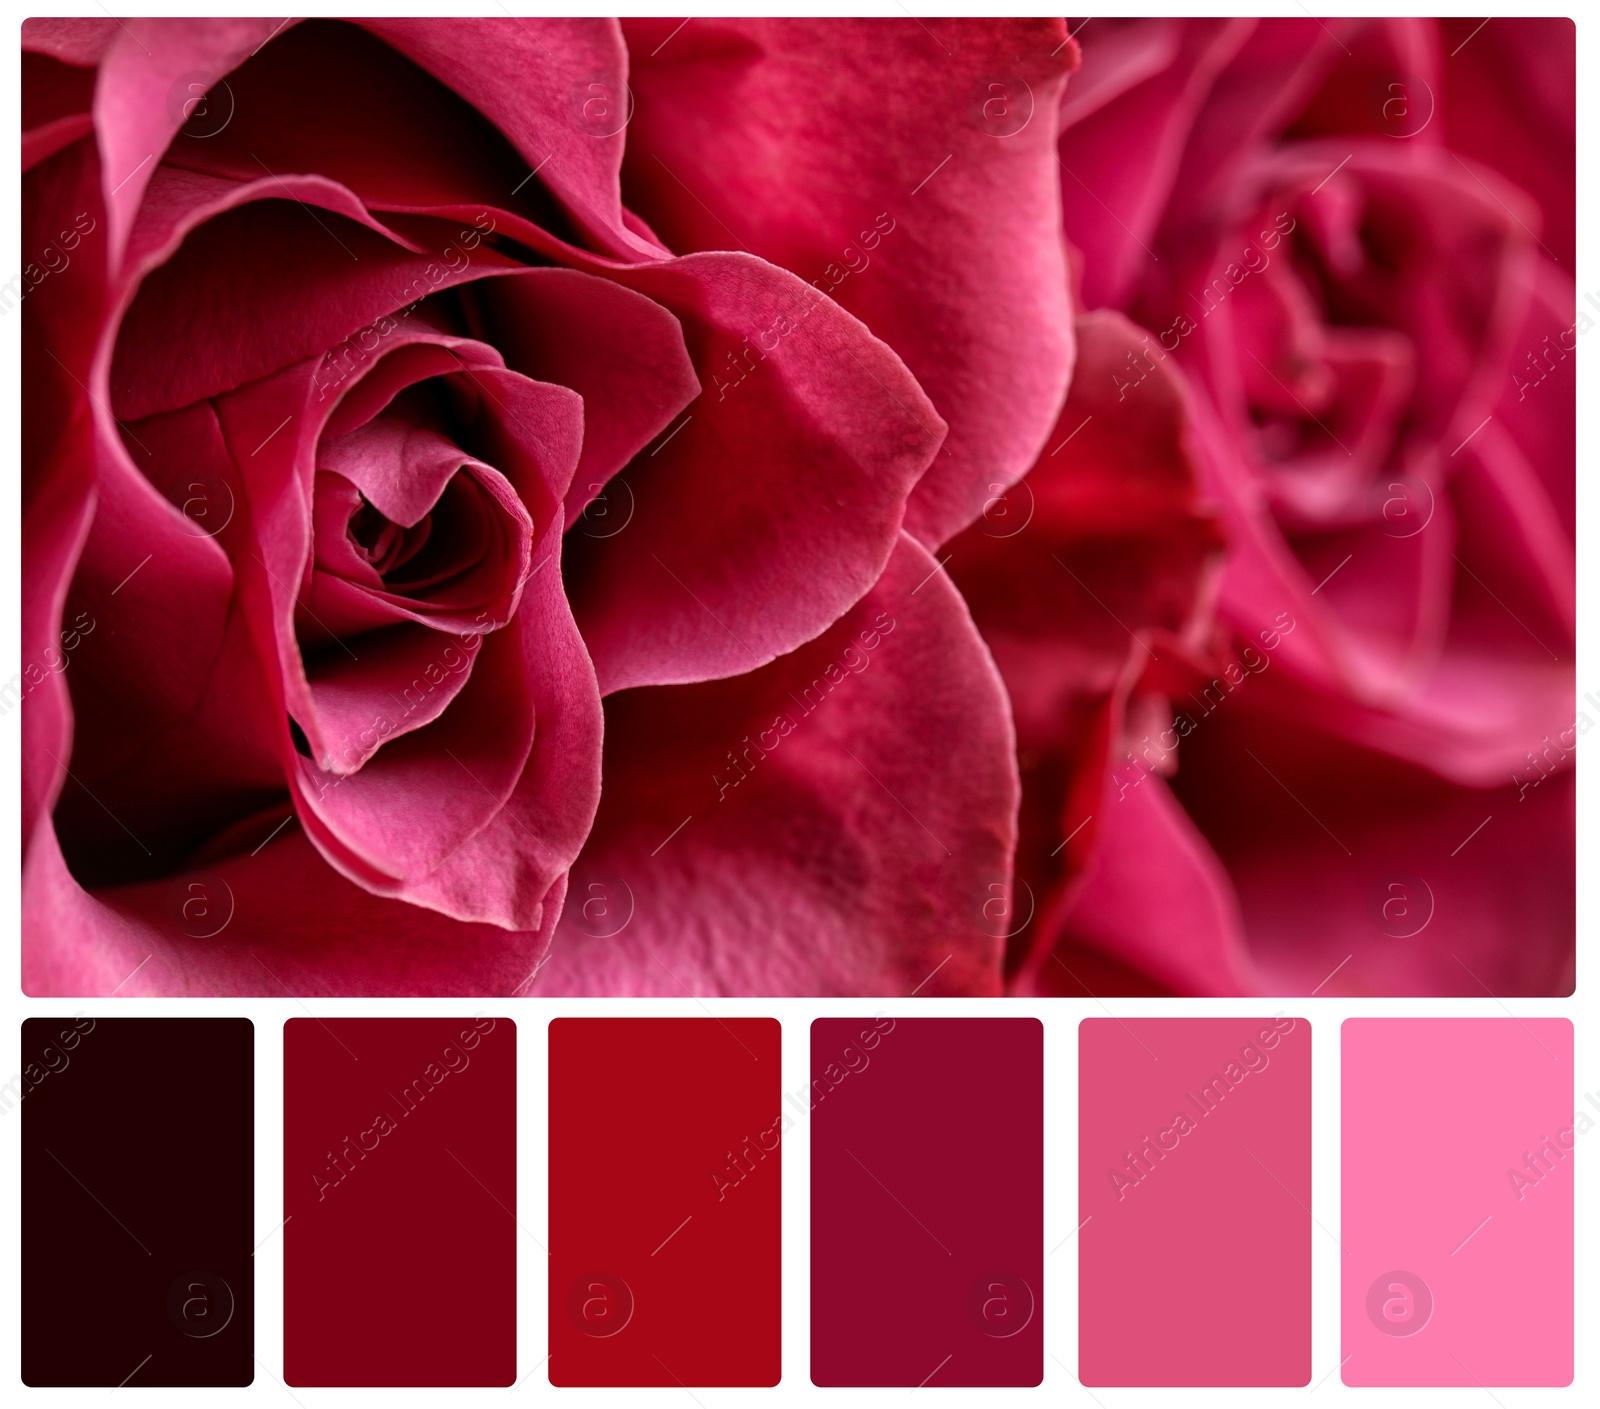 Image of Beautiful fresh roses and color palette. Collage